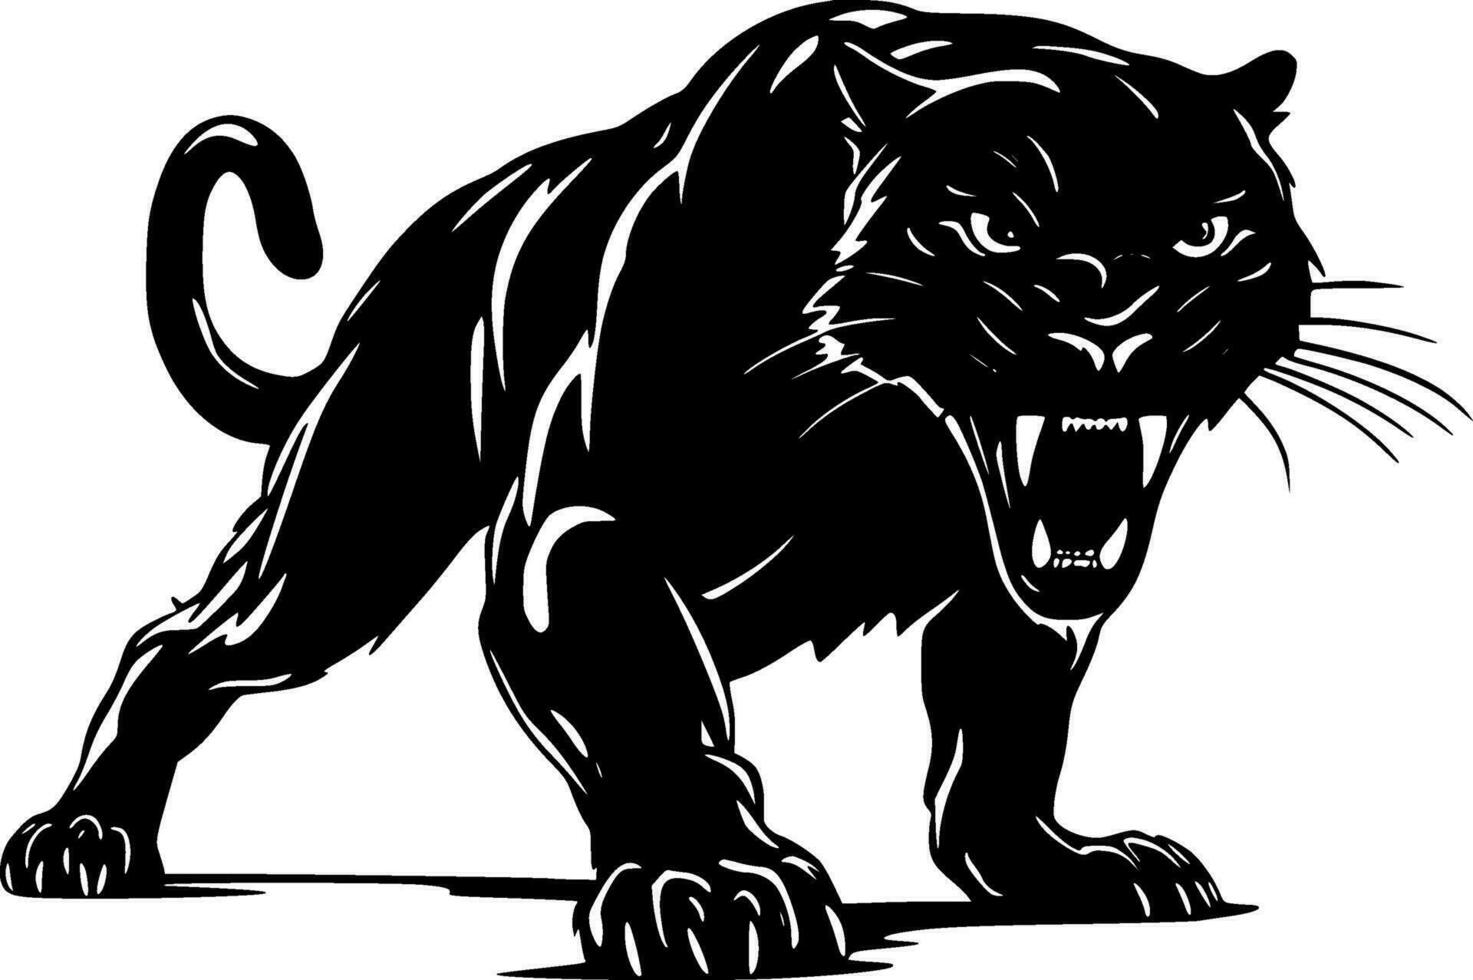 Panther - Black and White Isolated Icon - Vector illustration